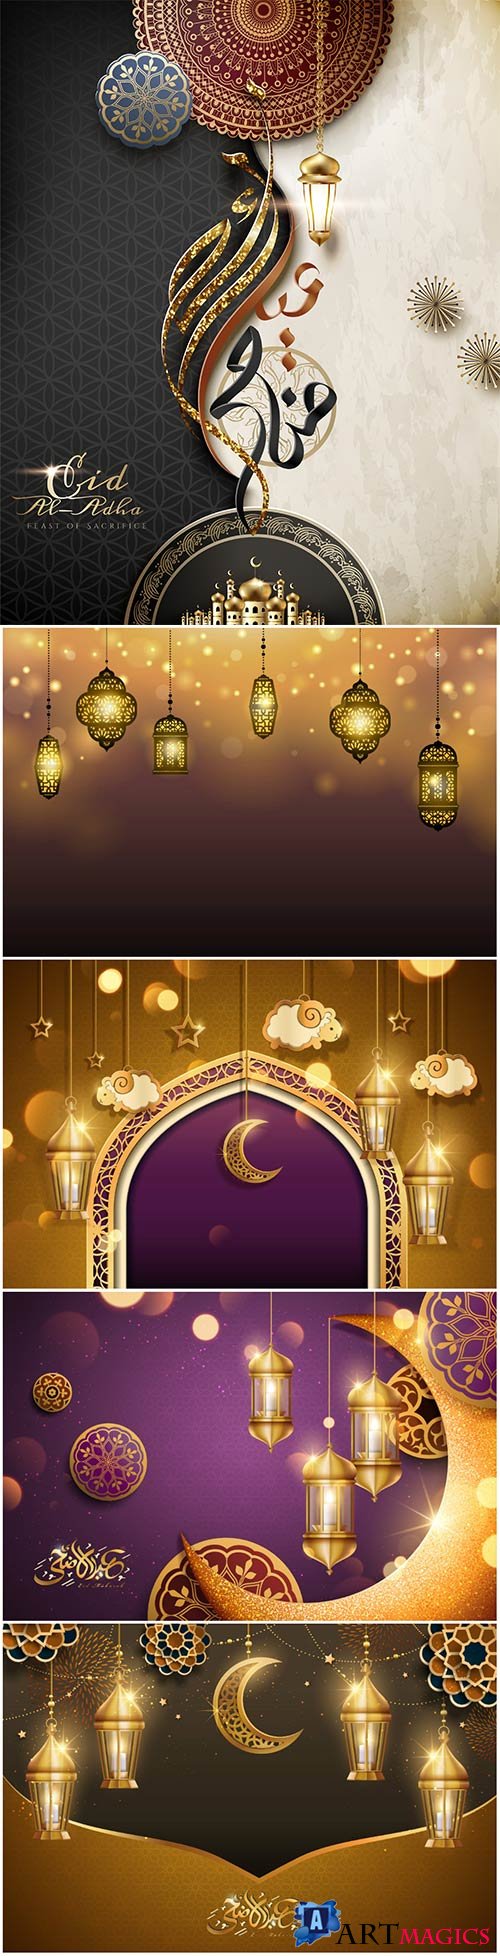 Eid al adha greeting vector design,  golden crescent with floral pattern